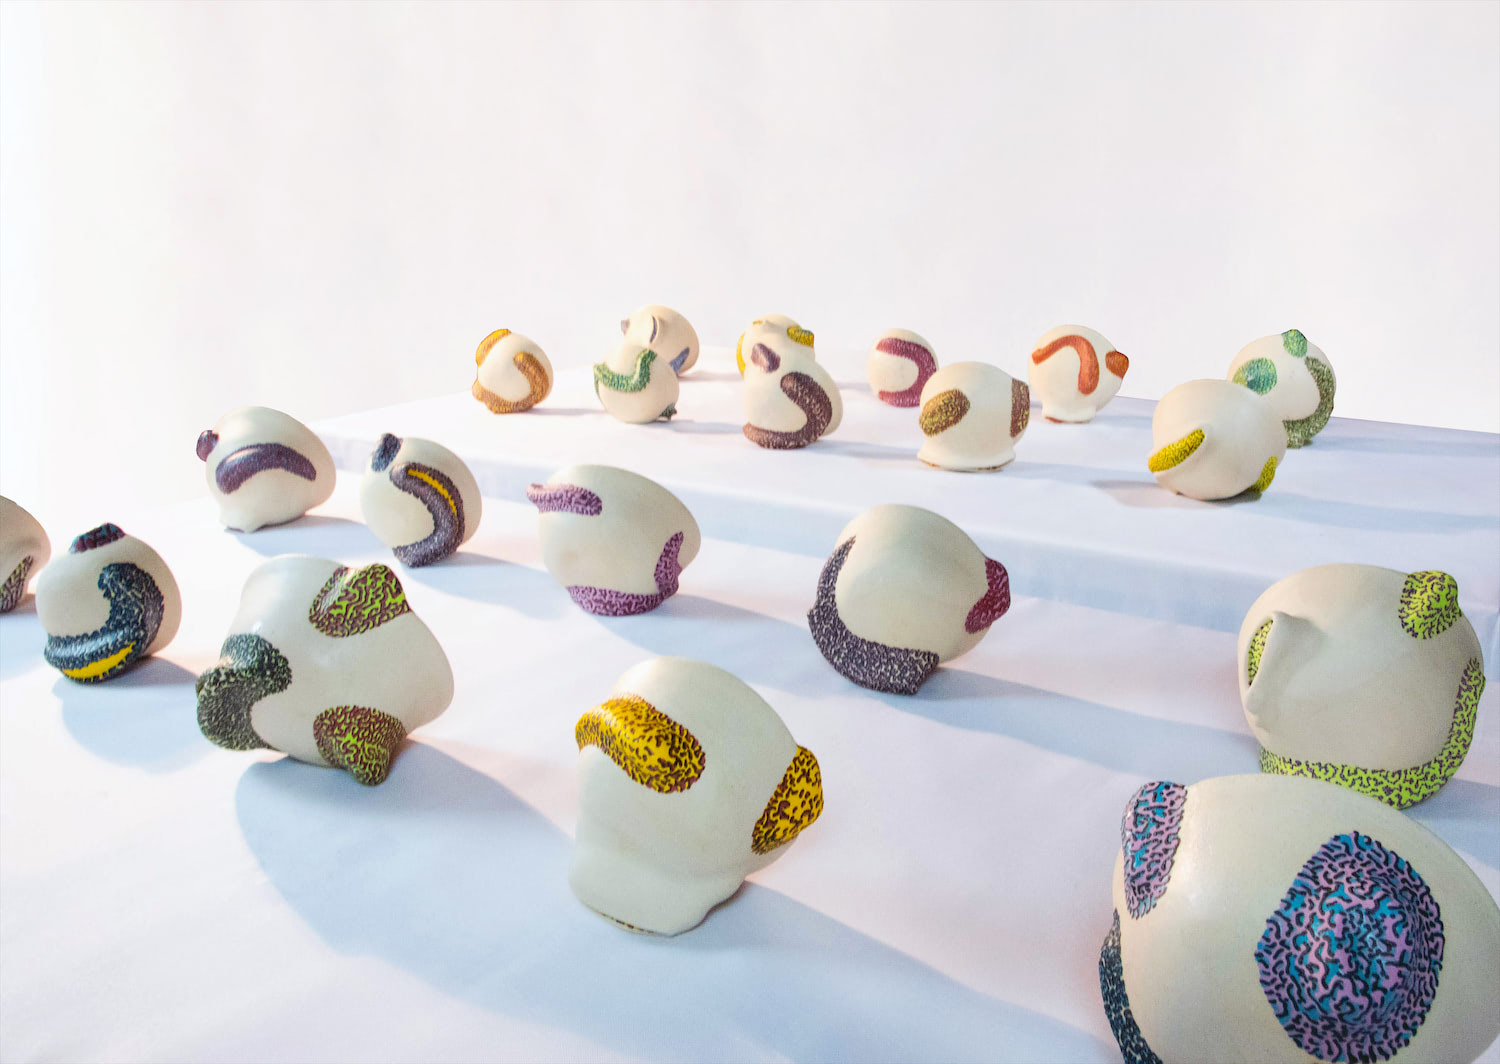 An image of the exteriors of many white bowl forms with colorful sculptural additions displayed on 2 rectangular tables with white table cloths.